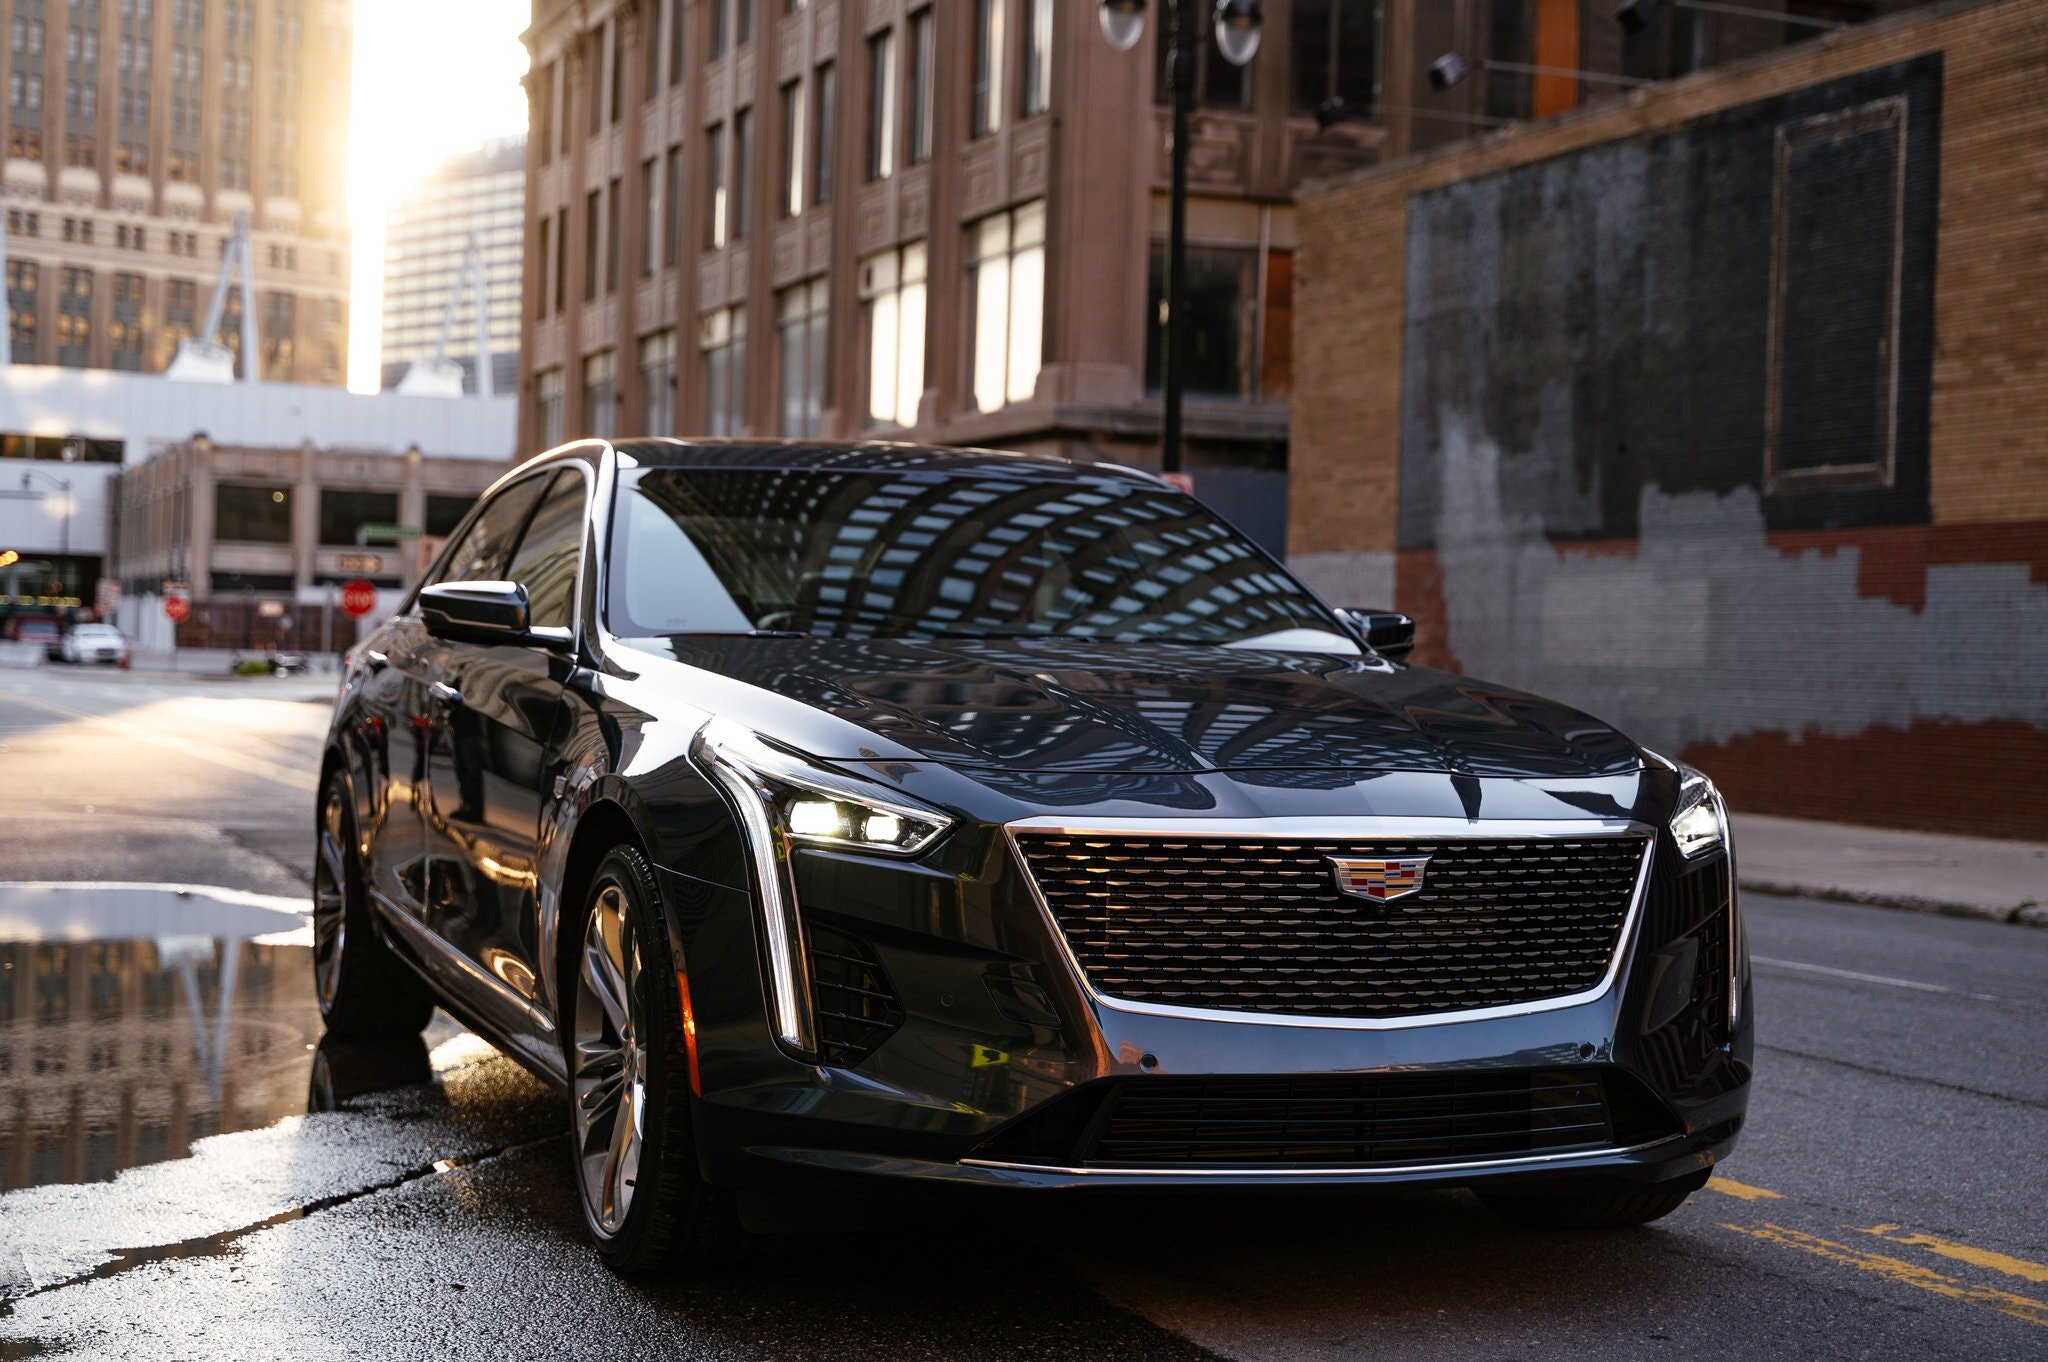 Cadillac’s Last Stand? David Placek, Lexicon Founder Comments in The New York Times on the Automotive Brand’s Revival